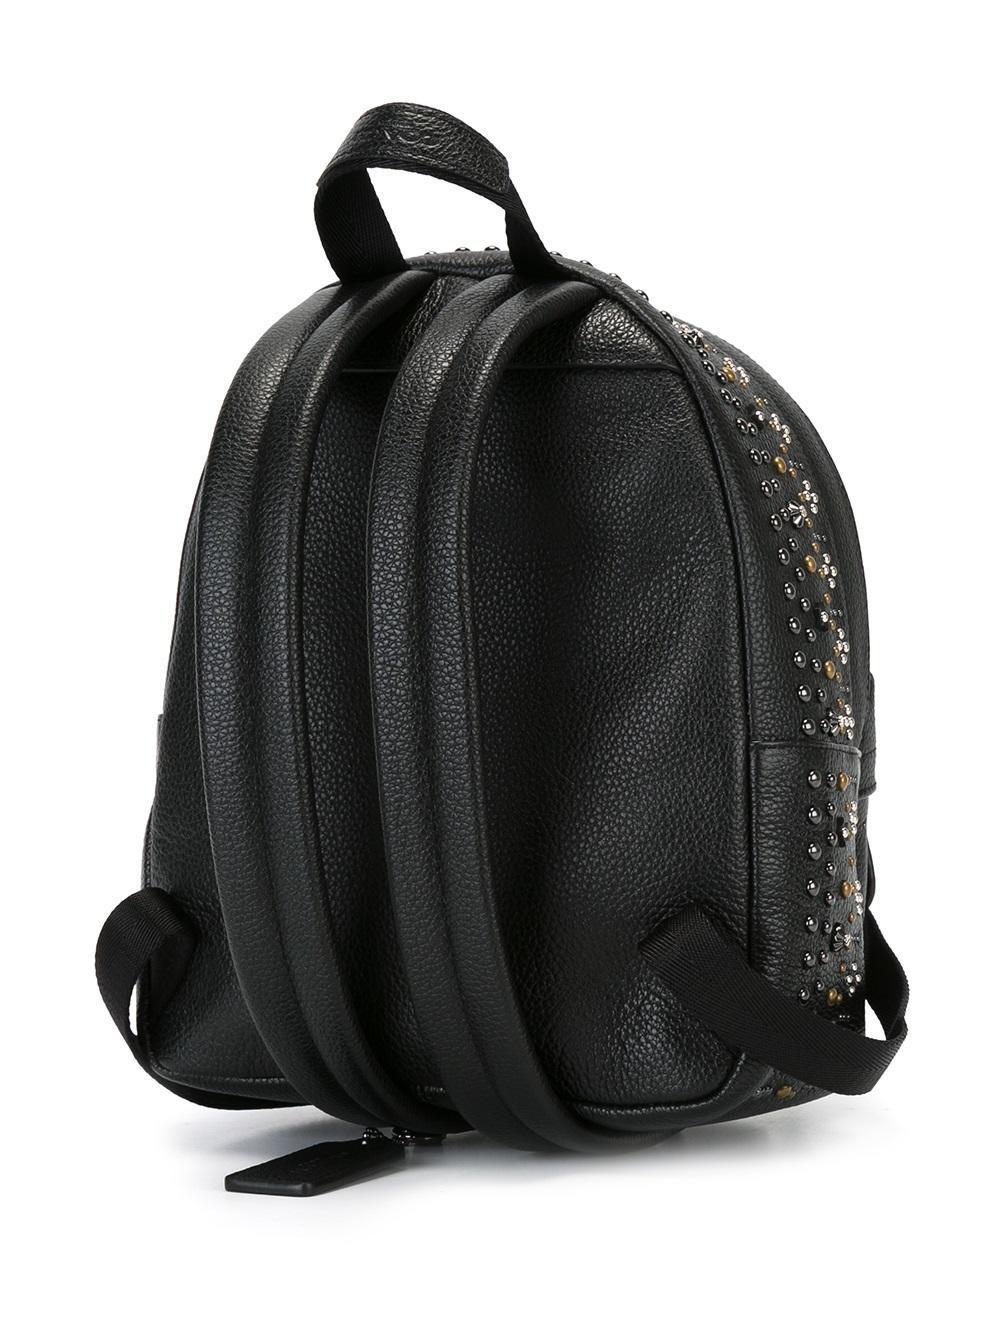 COACH Mini Studded Backpack in Black - Lyst